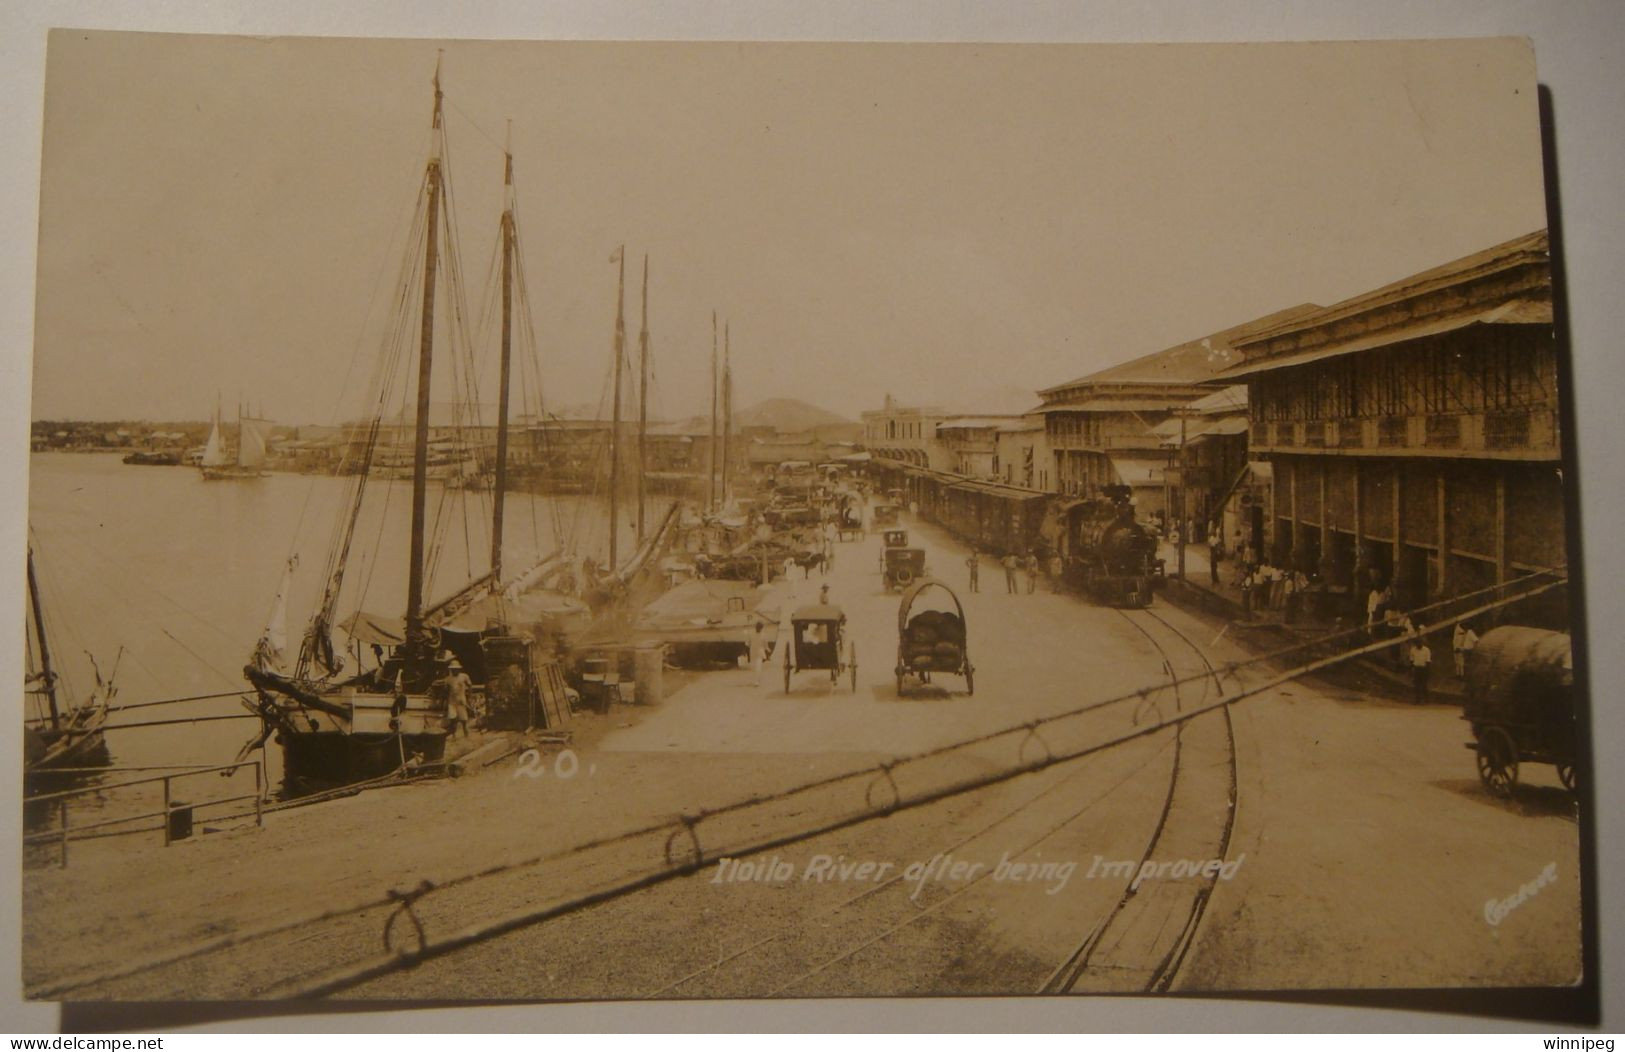 Iloilo,Philippines.Iloilo River After Being Improved.Railway,steamer,sail Boats,cars.cartsCasanave RPPC.1930. - Filipinas